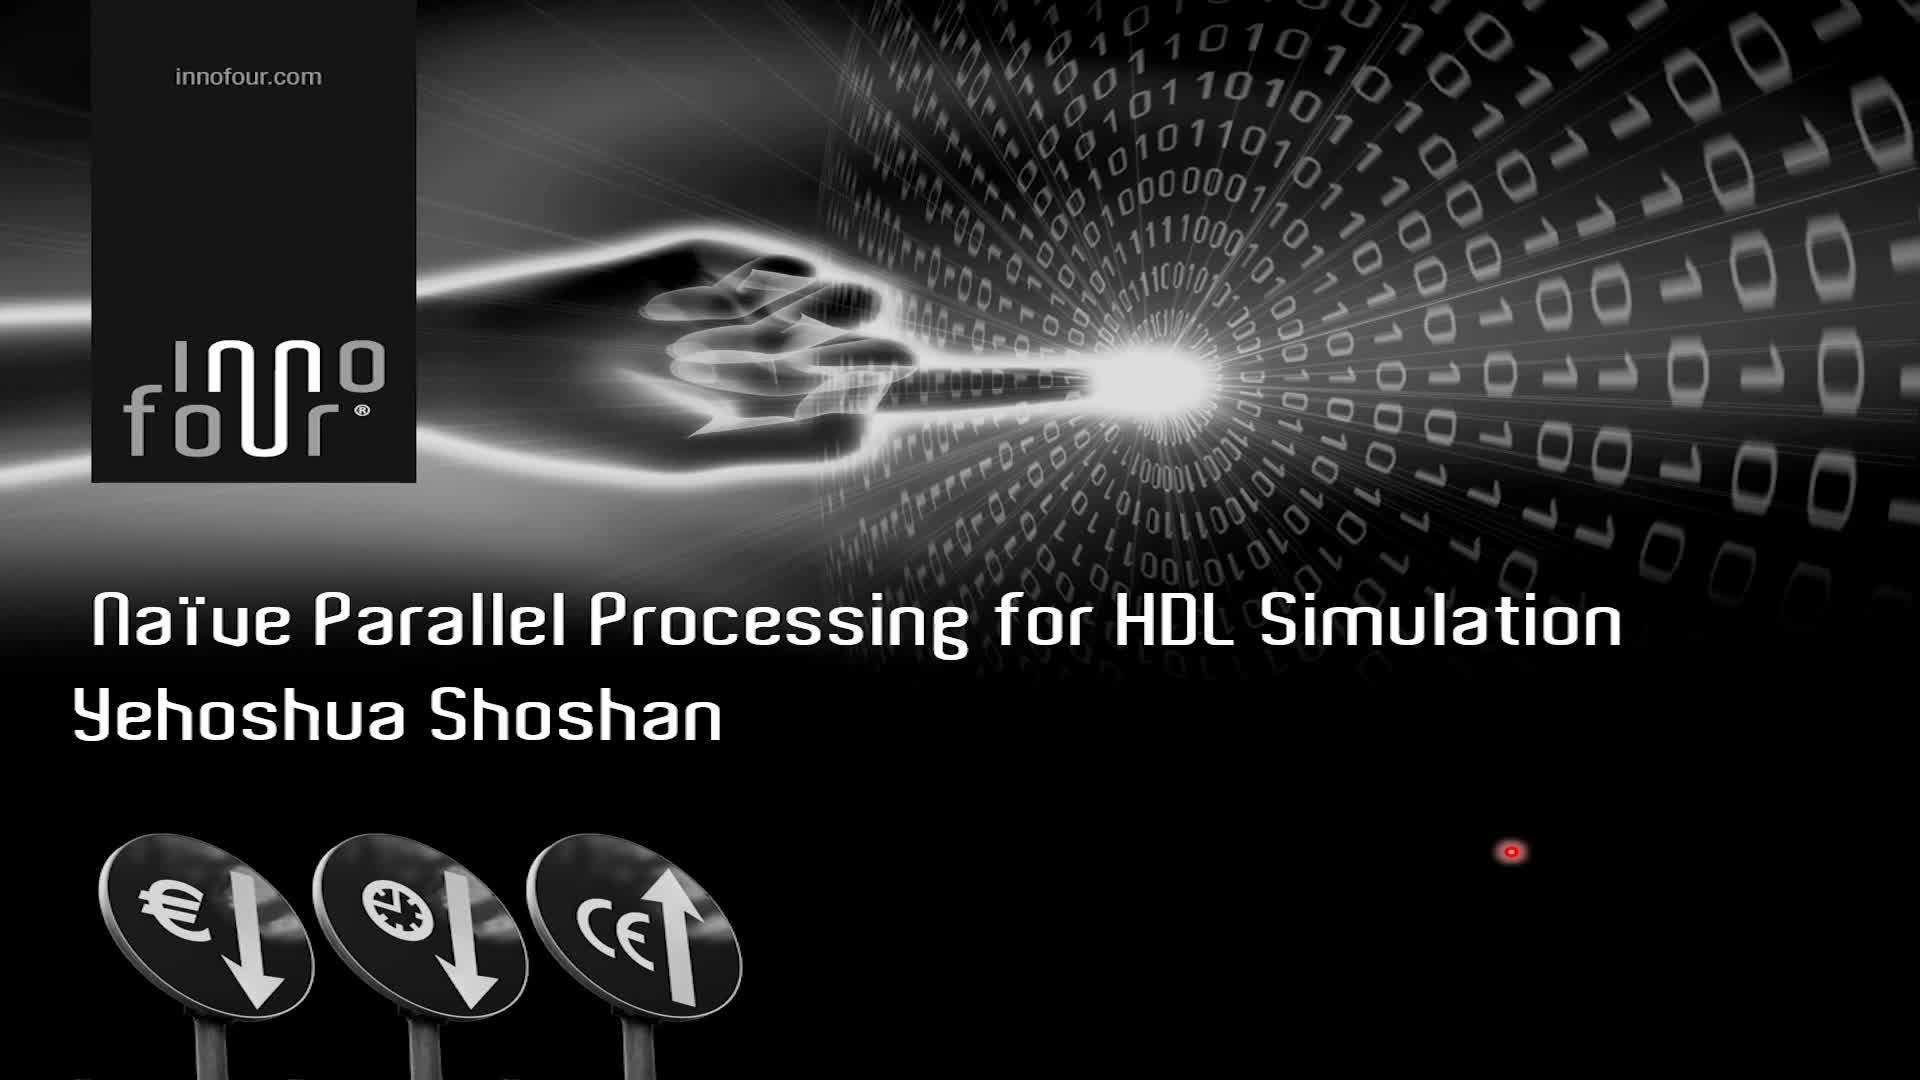 Linear Acceleration of HDL Simulation Using Naive Parallel Processing